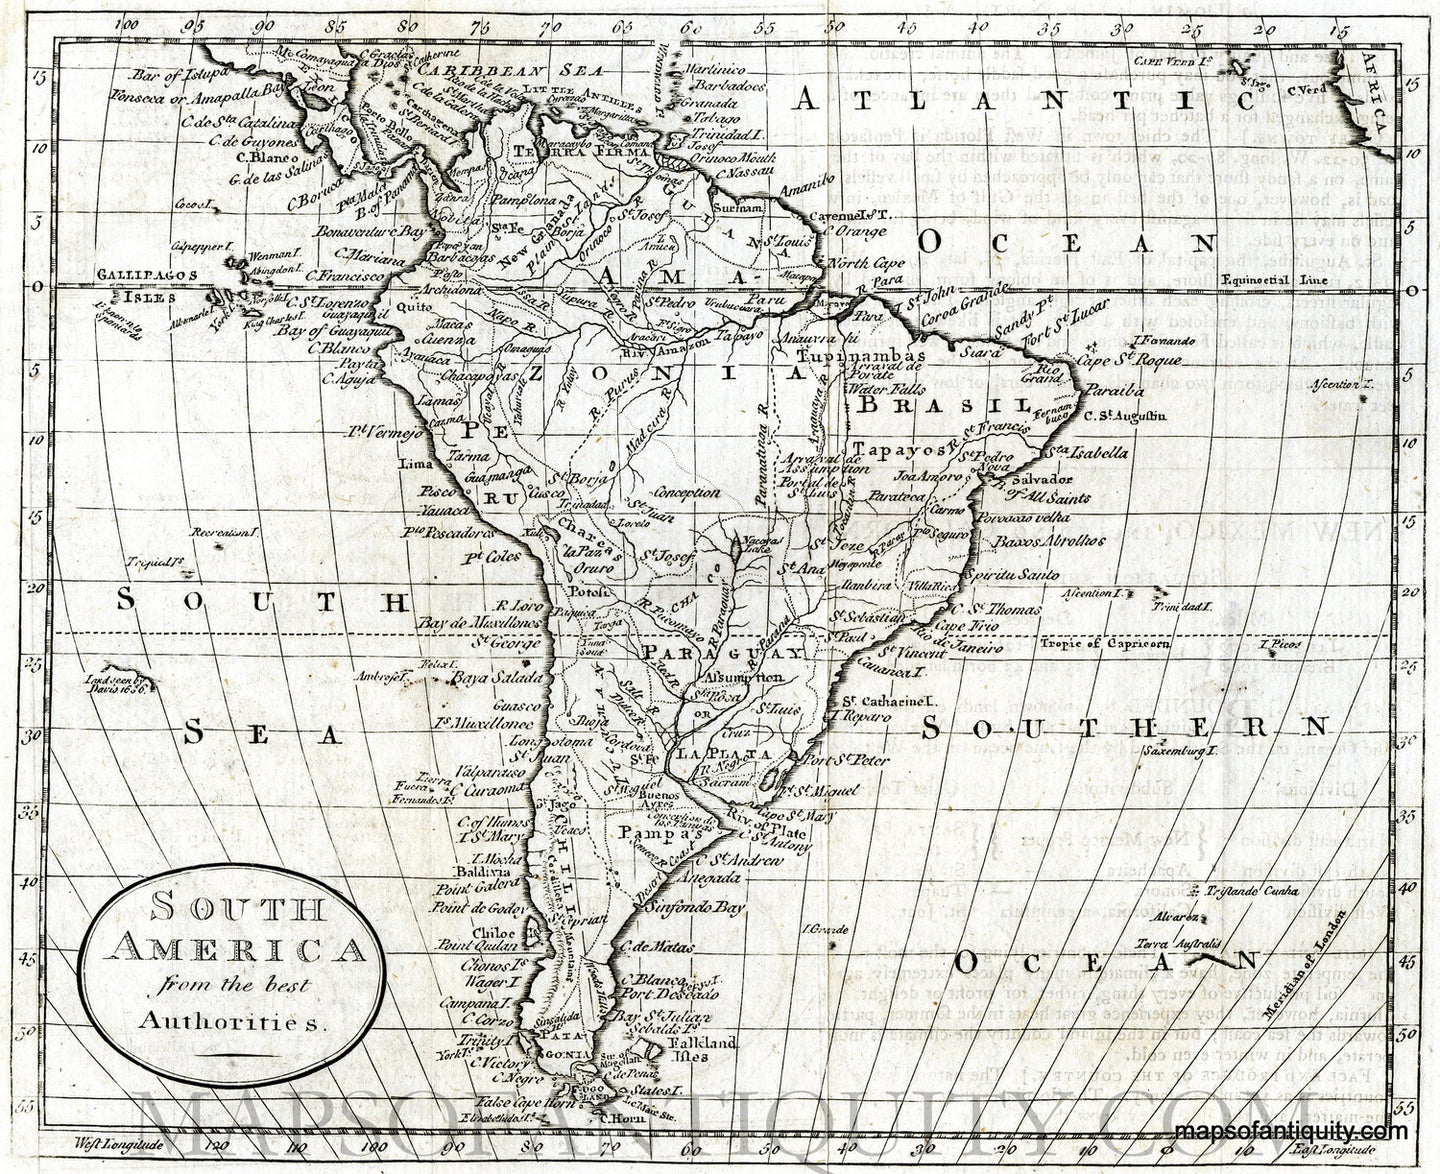 Black-and-white-antique-map-South-America-from-the-Best-Authorities-South-America-South-America-General-c.-1832-Hinton-or--Malte-Brun-Maps-Of-Antiquity